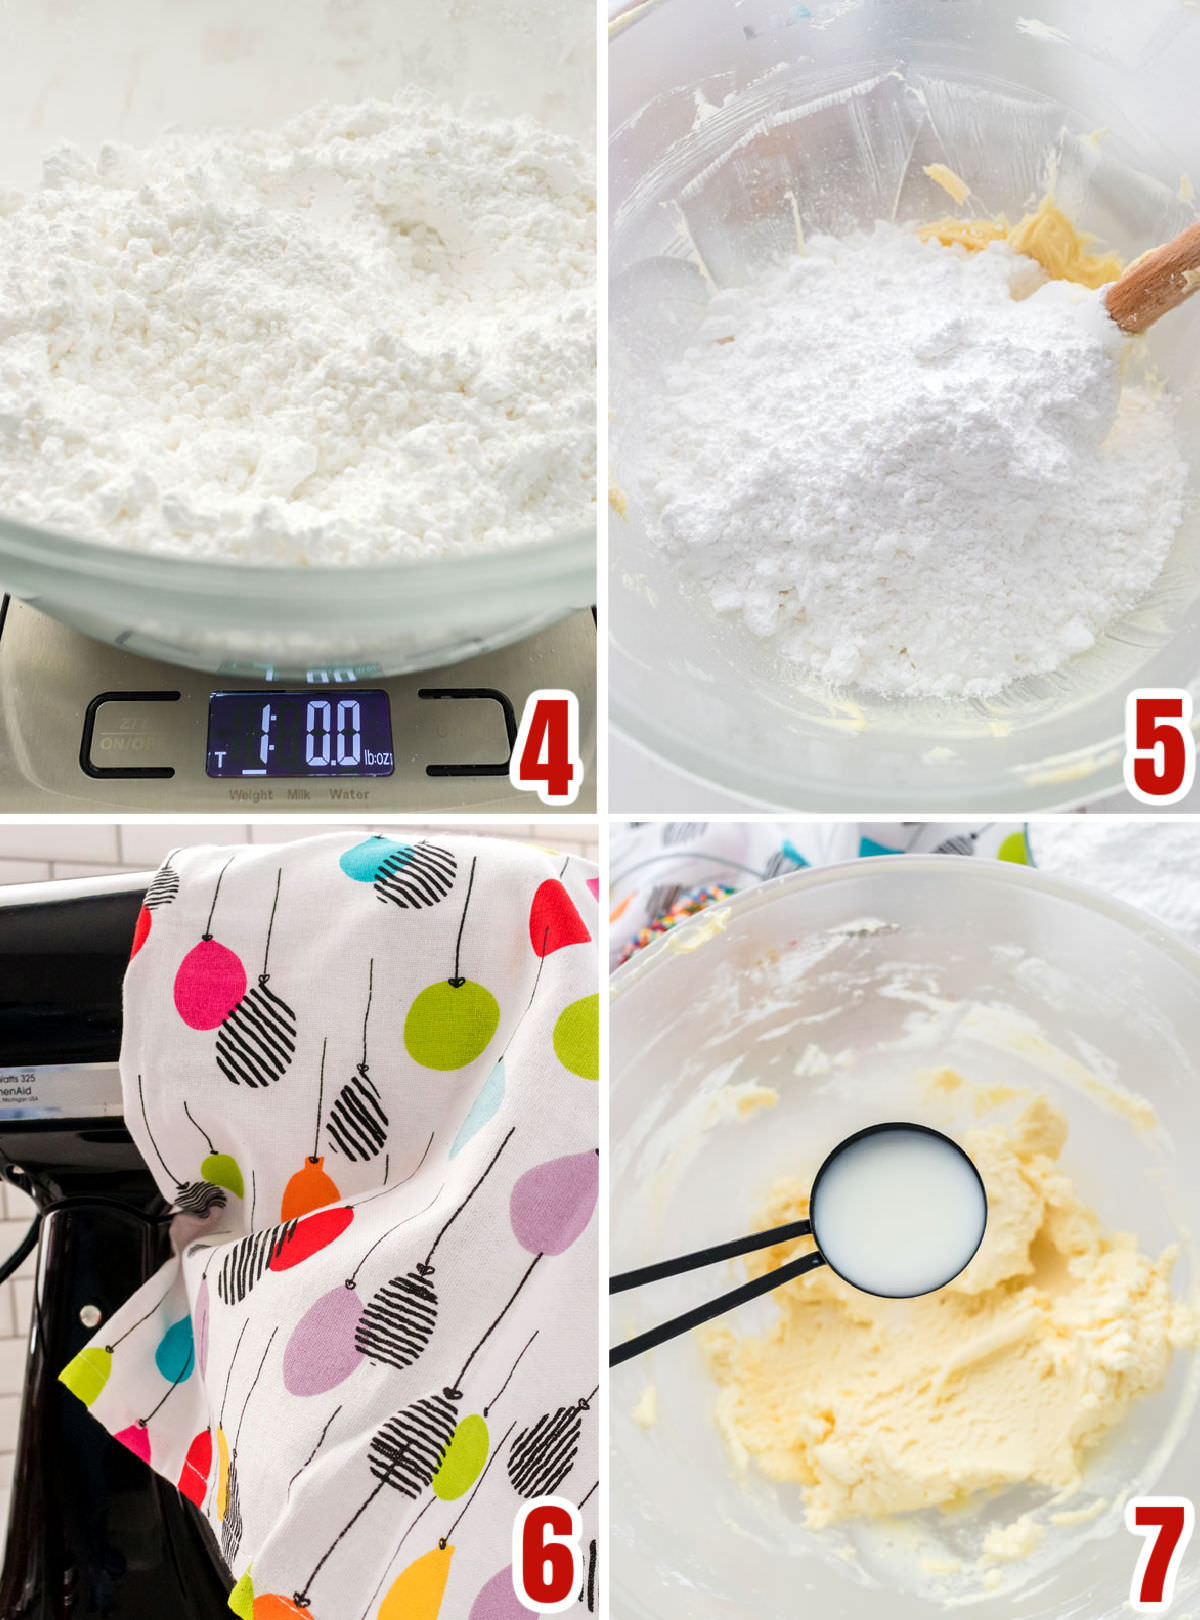 Collage image showing how to add the powdered sugar to the butter/cake batter mixture.